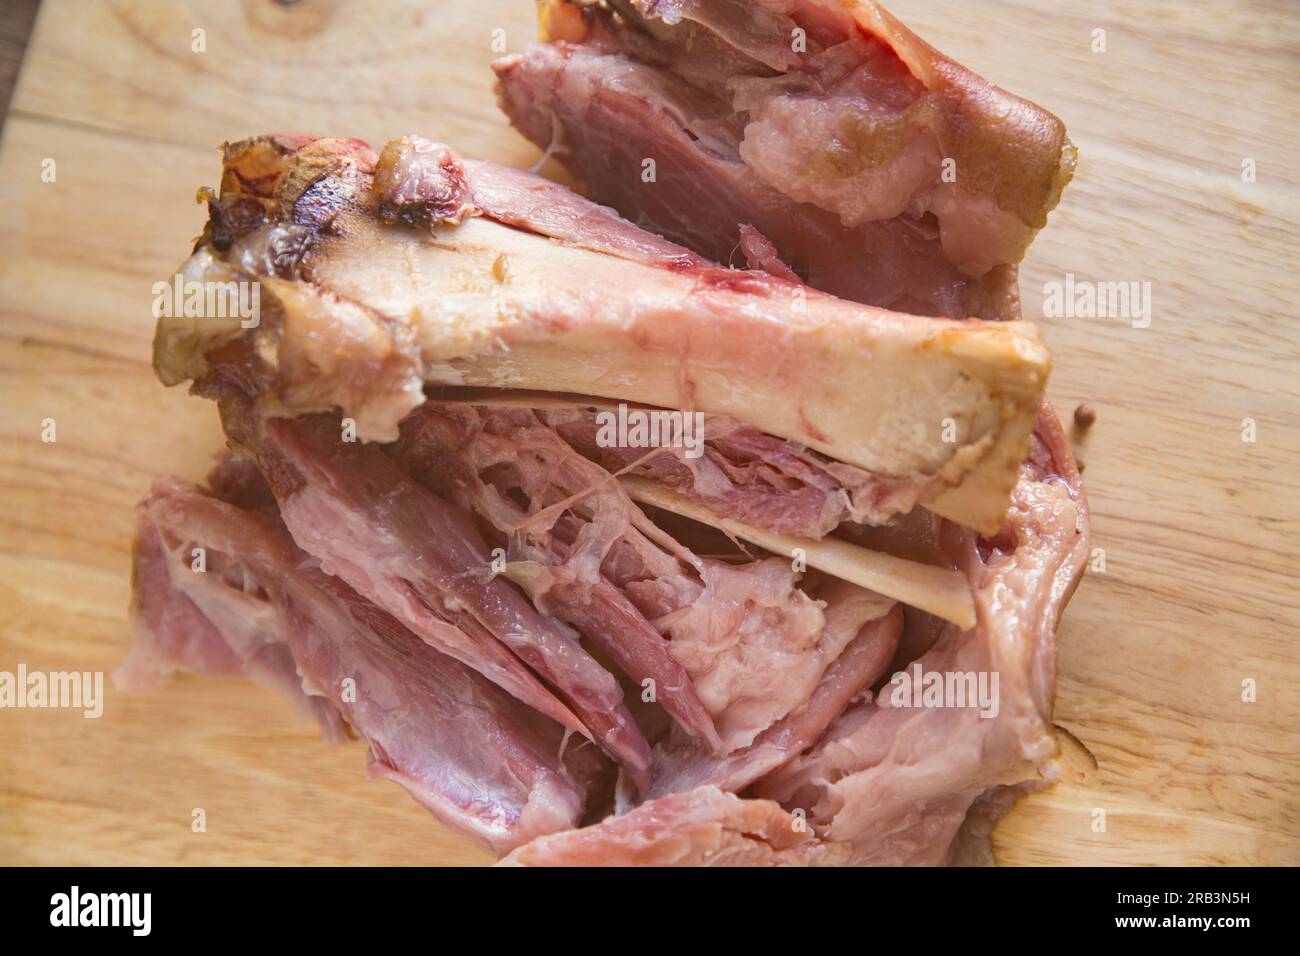 A British gammon shank that has been slow cooked and allowed to cool before making a homemade terrine. England UK GB Stock Photo